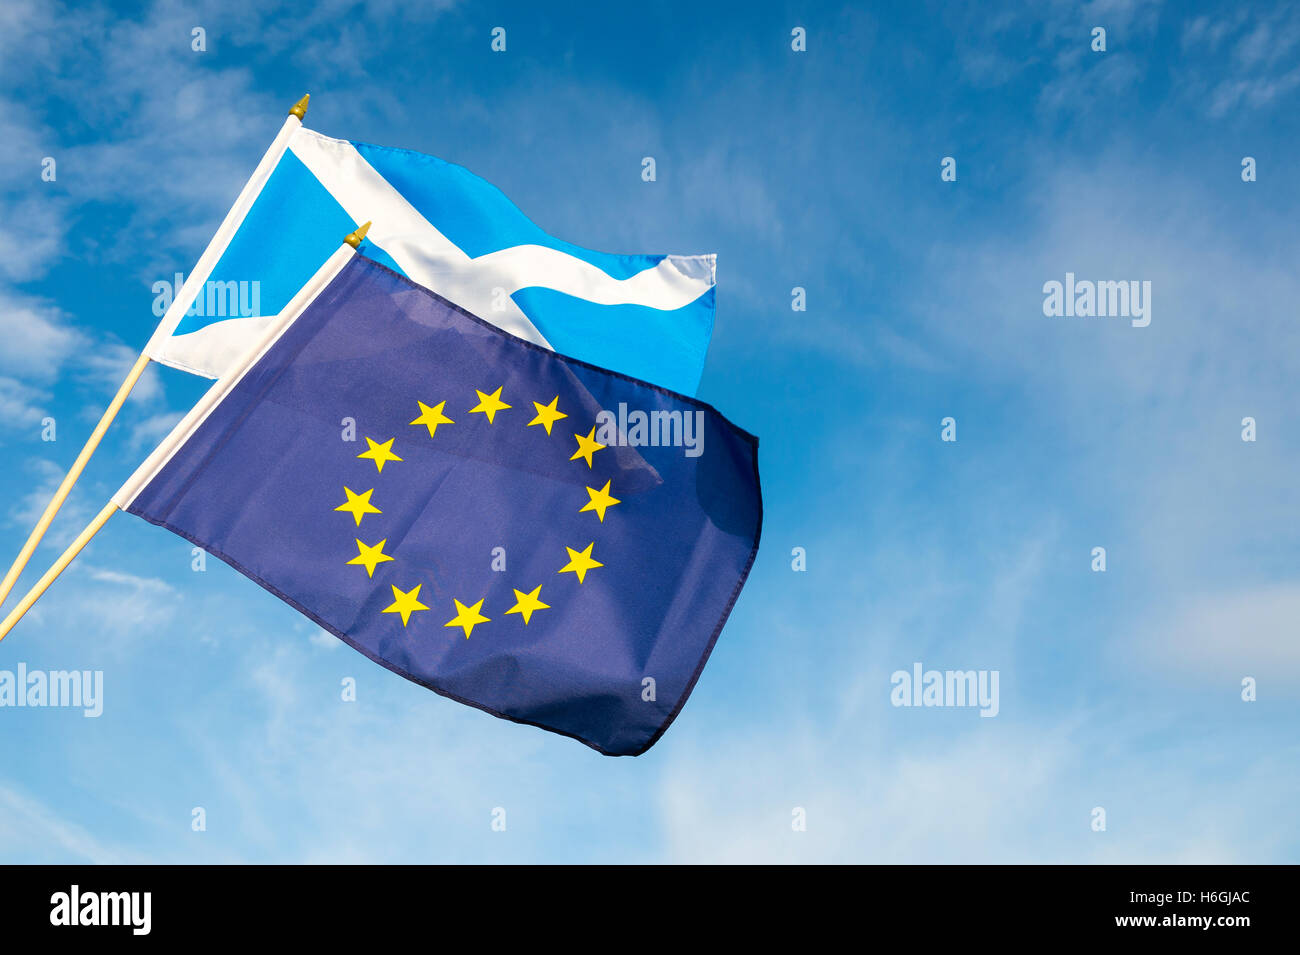 Scottish and EU flags flying in bright blue sky Stock Photo